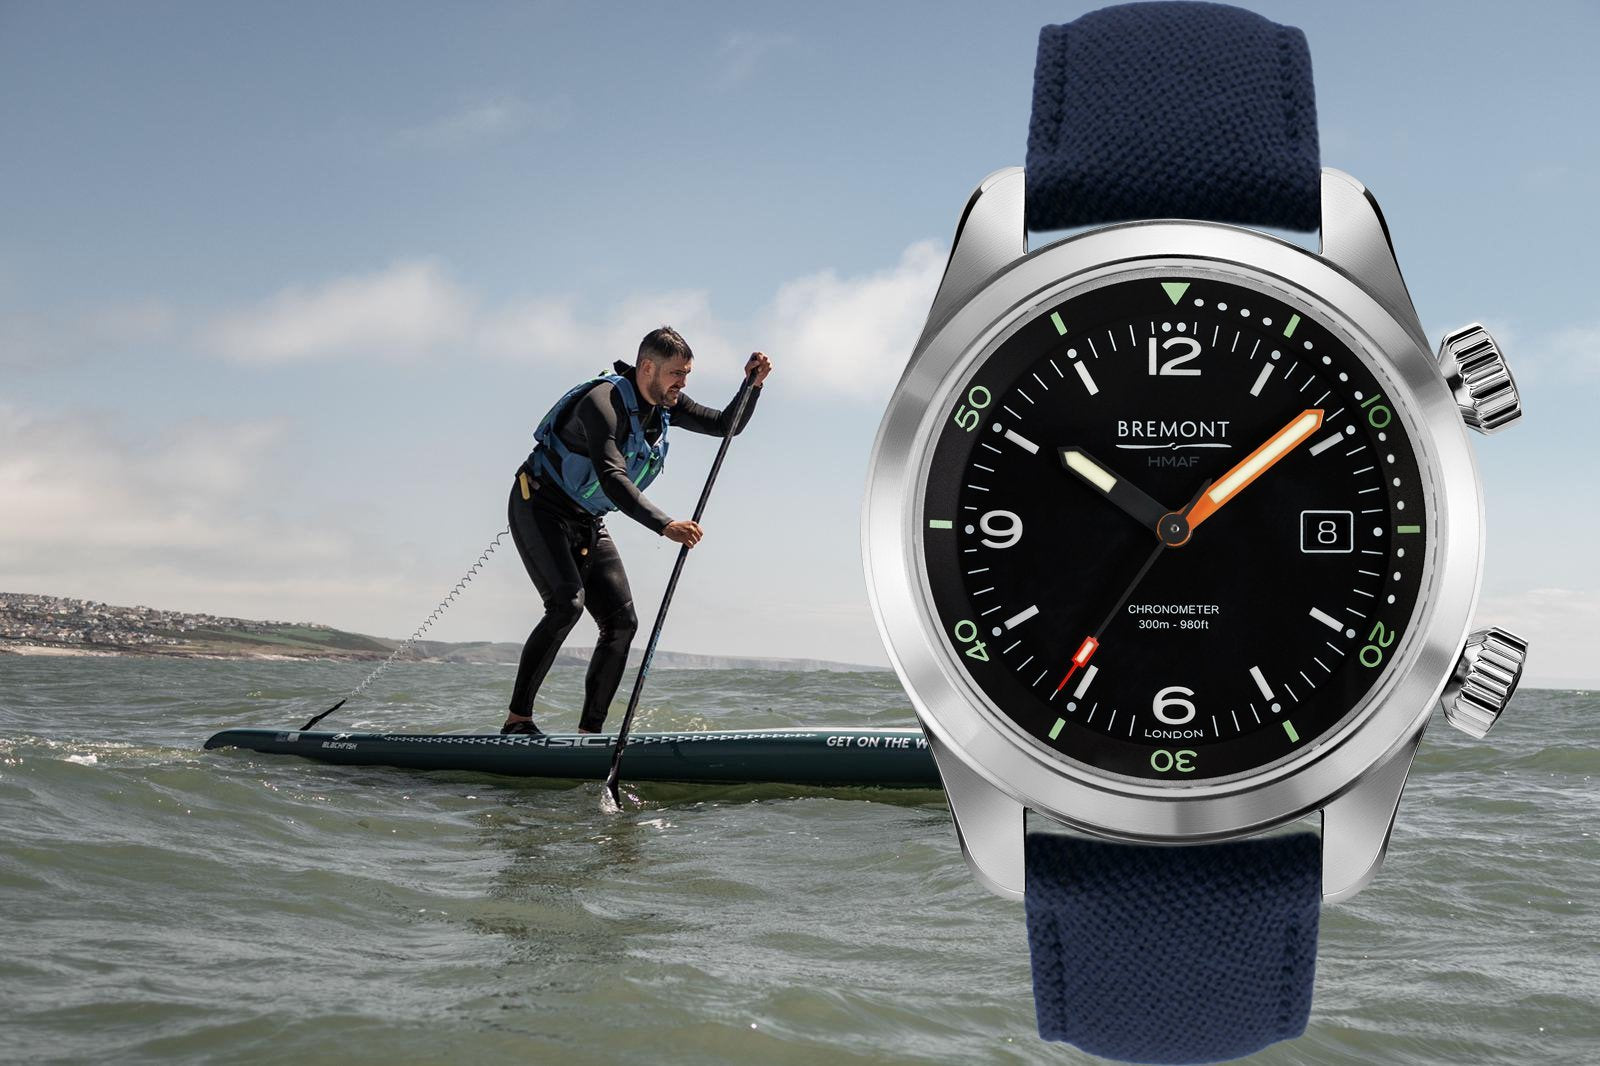 BREMONT AMBASSADOR JORDAN WYLIE TESTS THE ARGONAUT DURING RECORD BREAKING SOLO PADDLE BOARD ATTEMPT